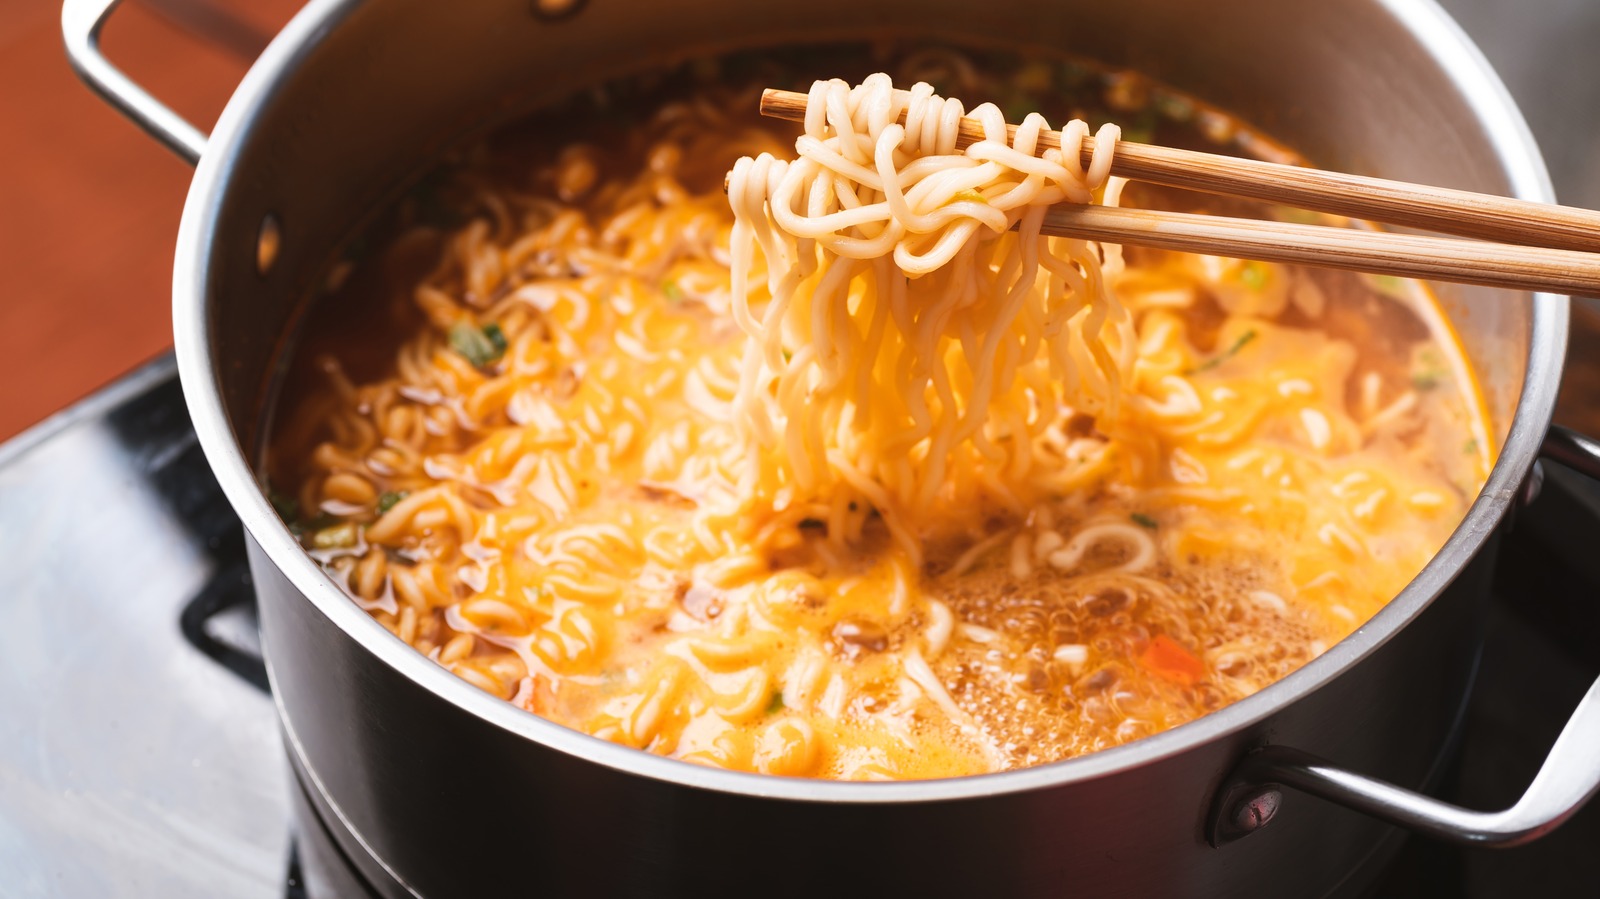 This Personal Home Ramen Maker Is Your New Significant Other